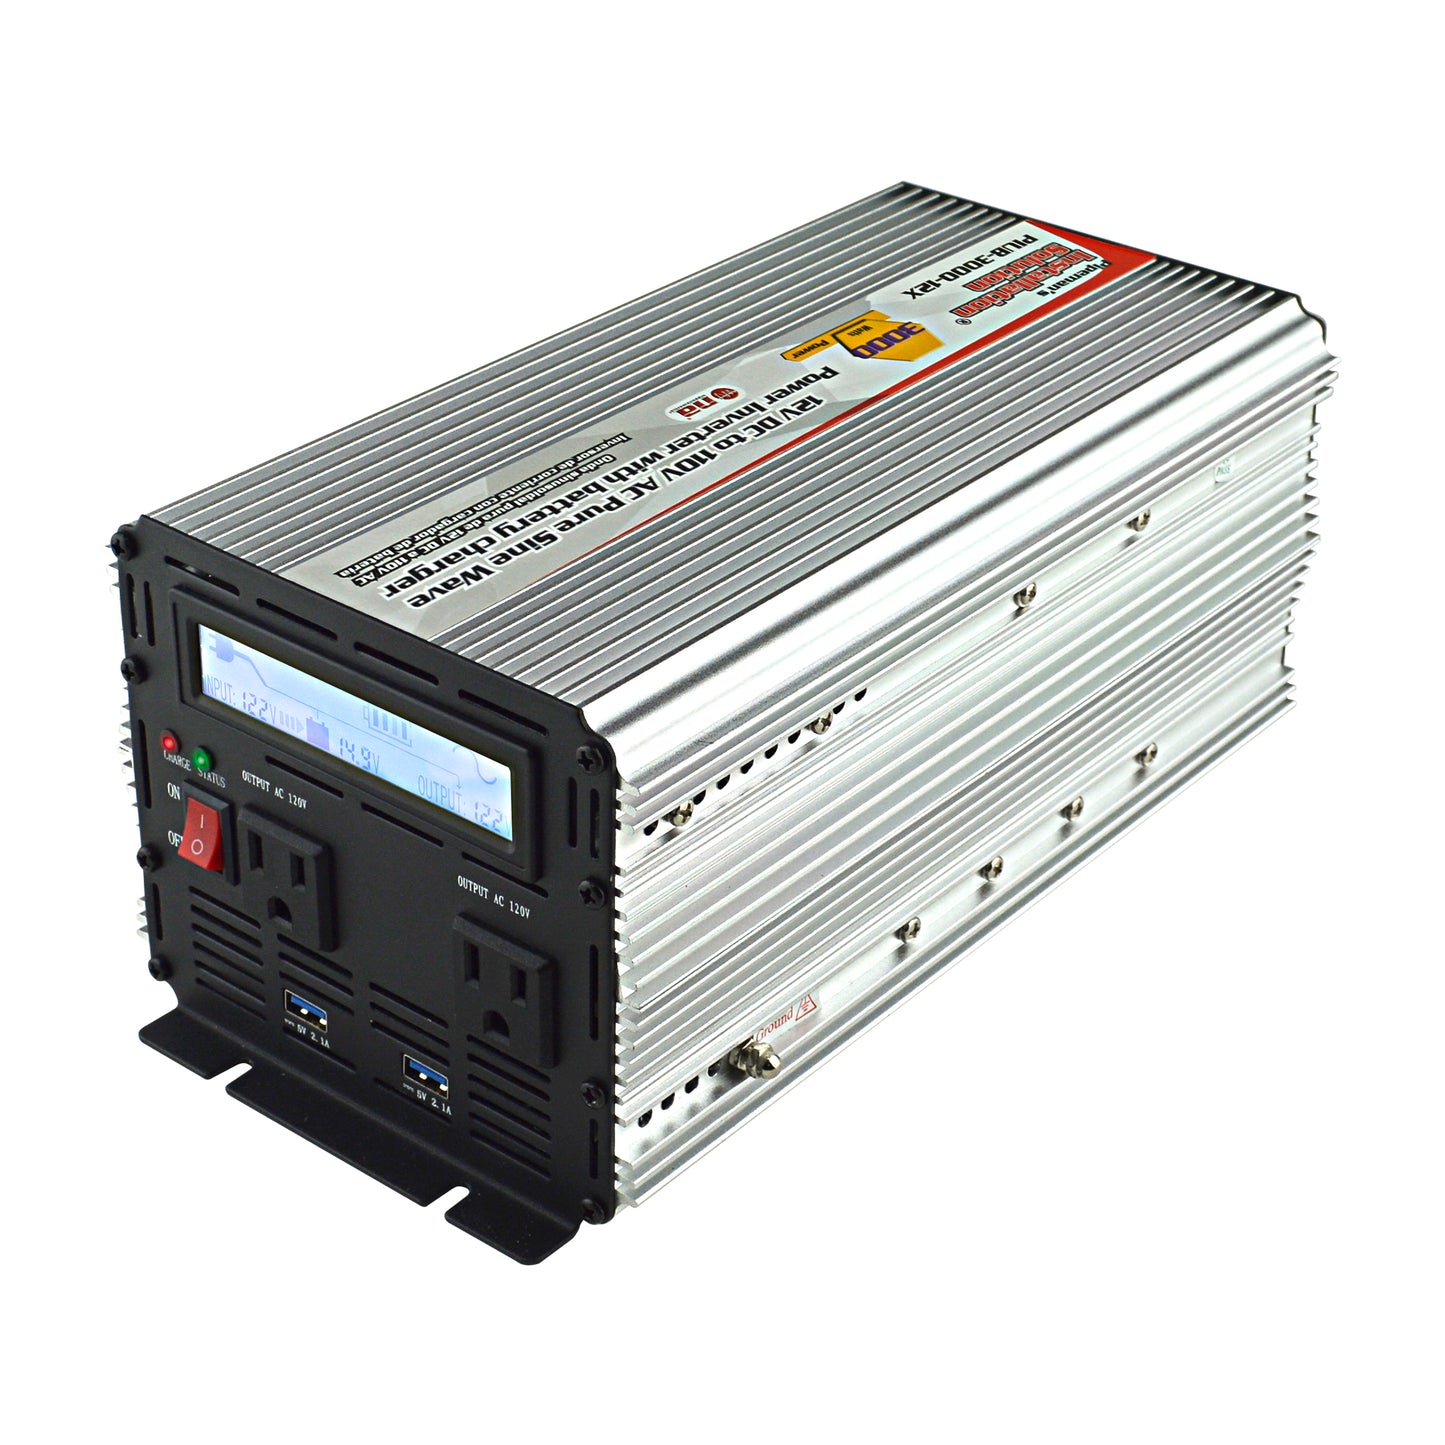 PIUB-2000-12X - 12V DC to 110V AC Pure Sine Wave Power Inverter With Battery Charger